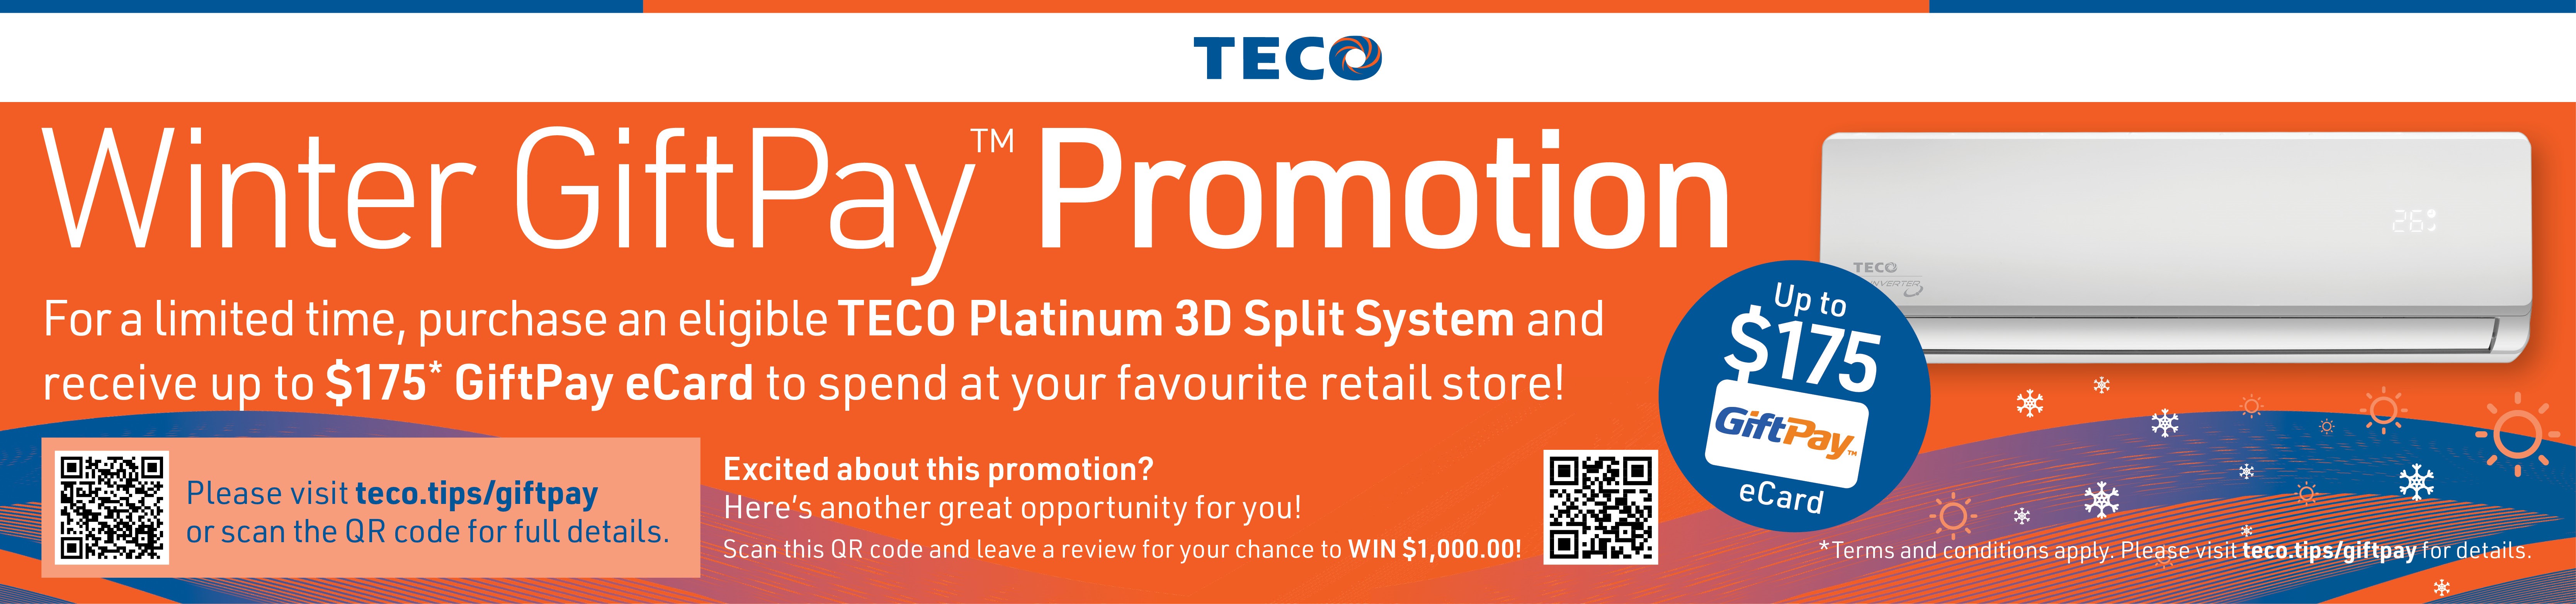 Bonus GiftPay eCard Up To $175* On Selected TECO Platinum 3D Split Systems at Retravision